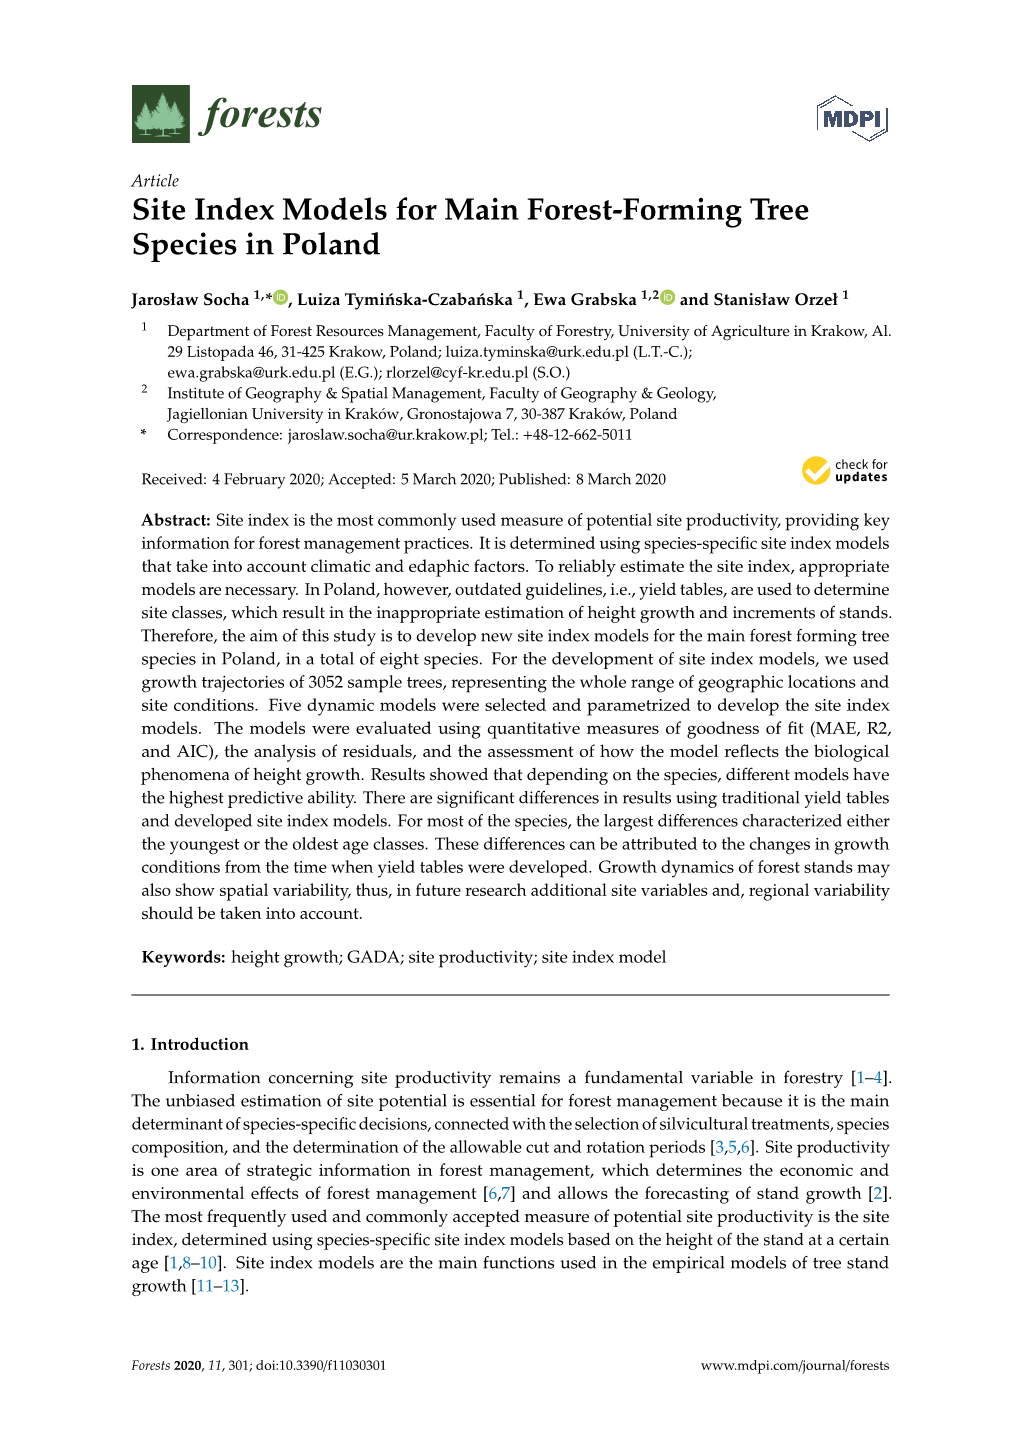 Site Index Models for Main Forest-Forming Tree Species in Poland